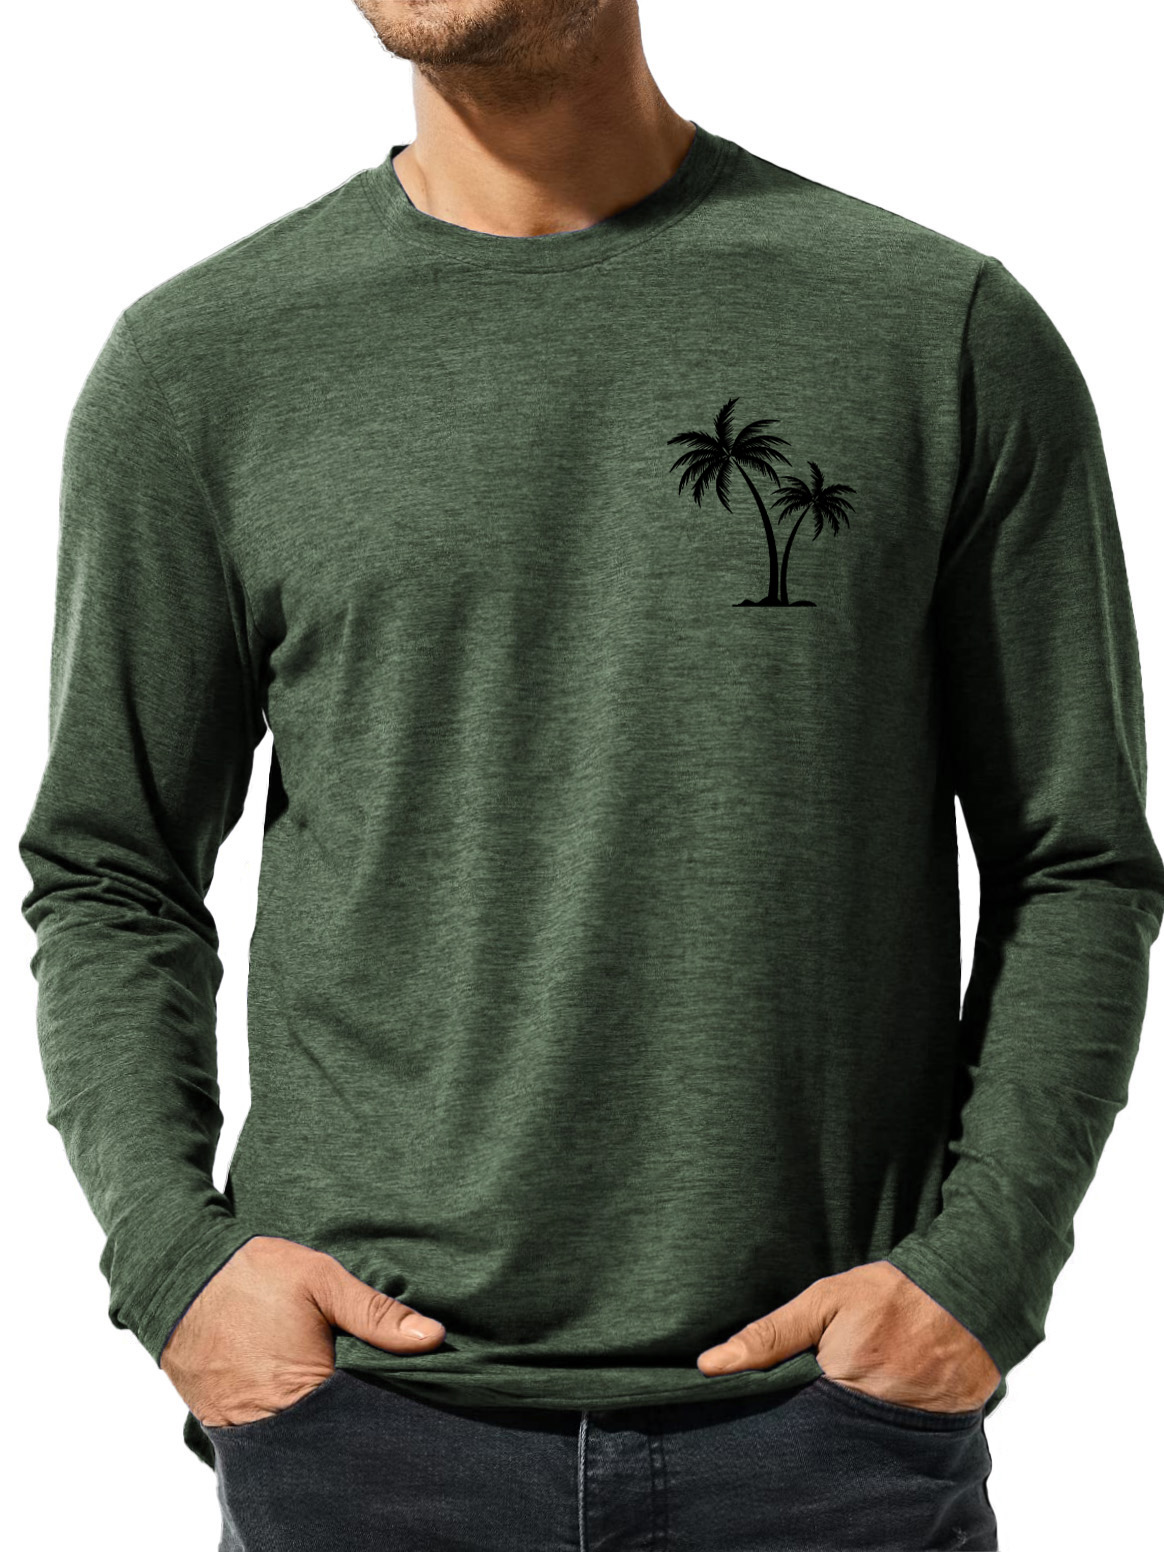 Men's Fashion Casual Coconut Print Long Sleeve Bottoming T-Shirt